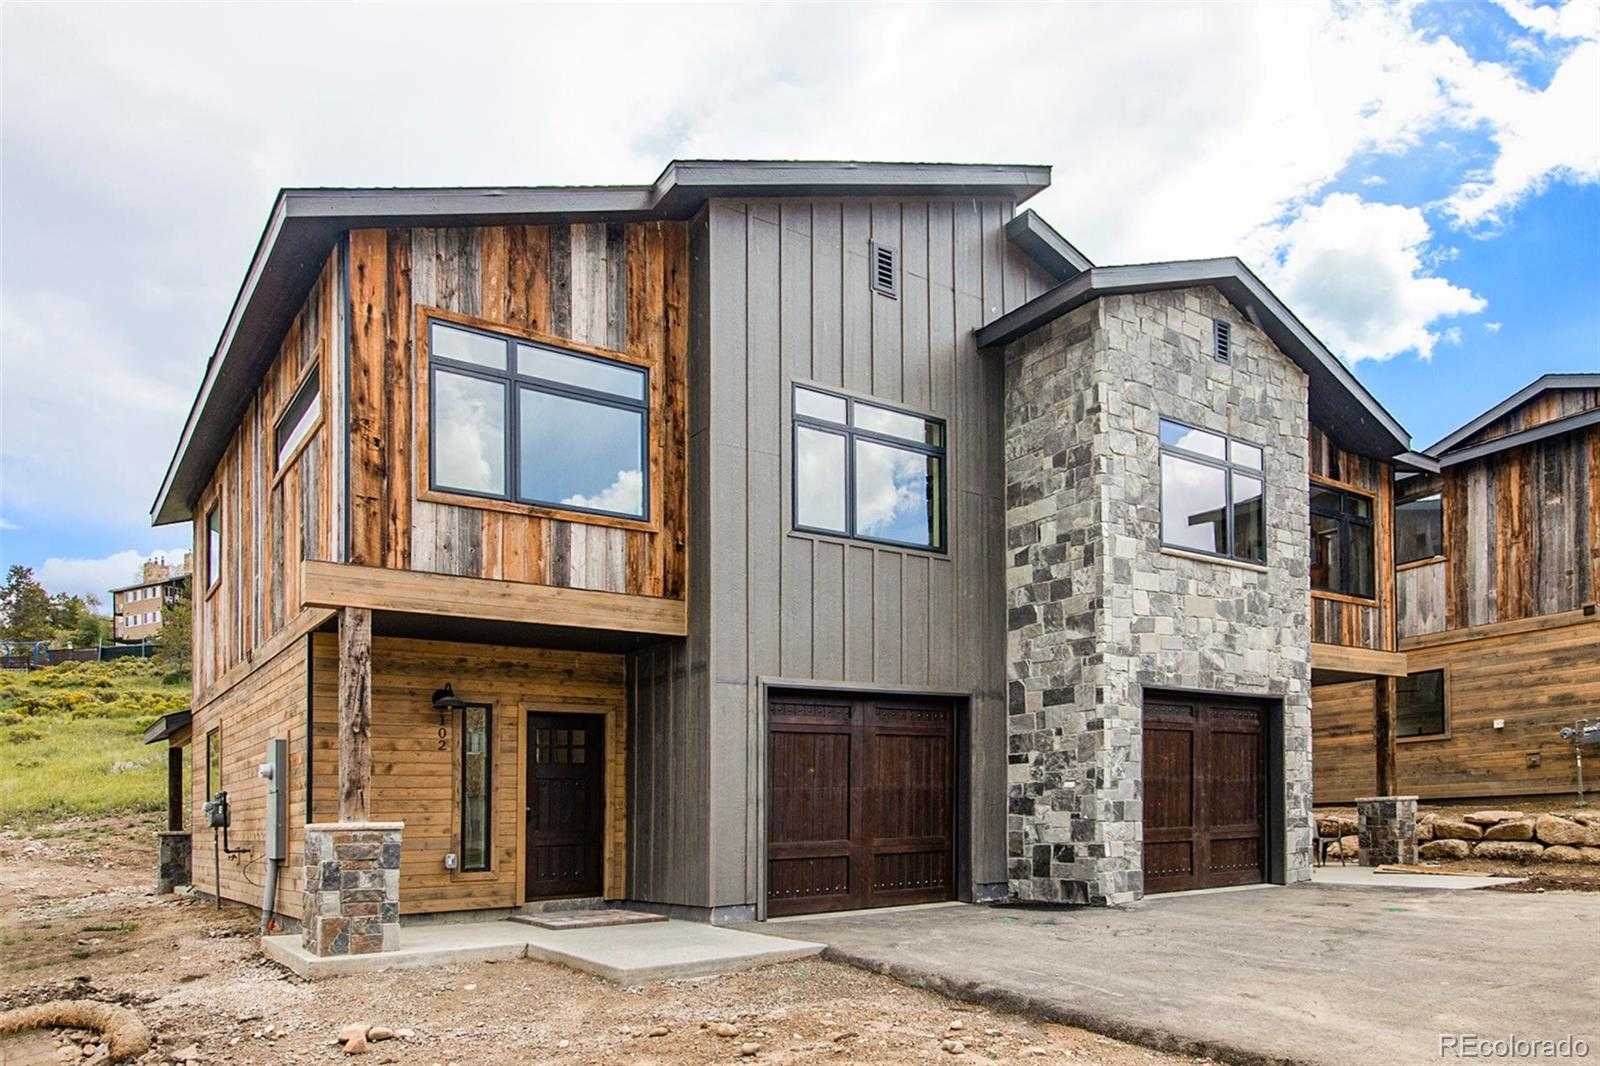 View Granby, CO 80446 townhome